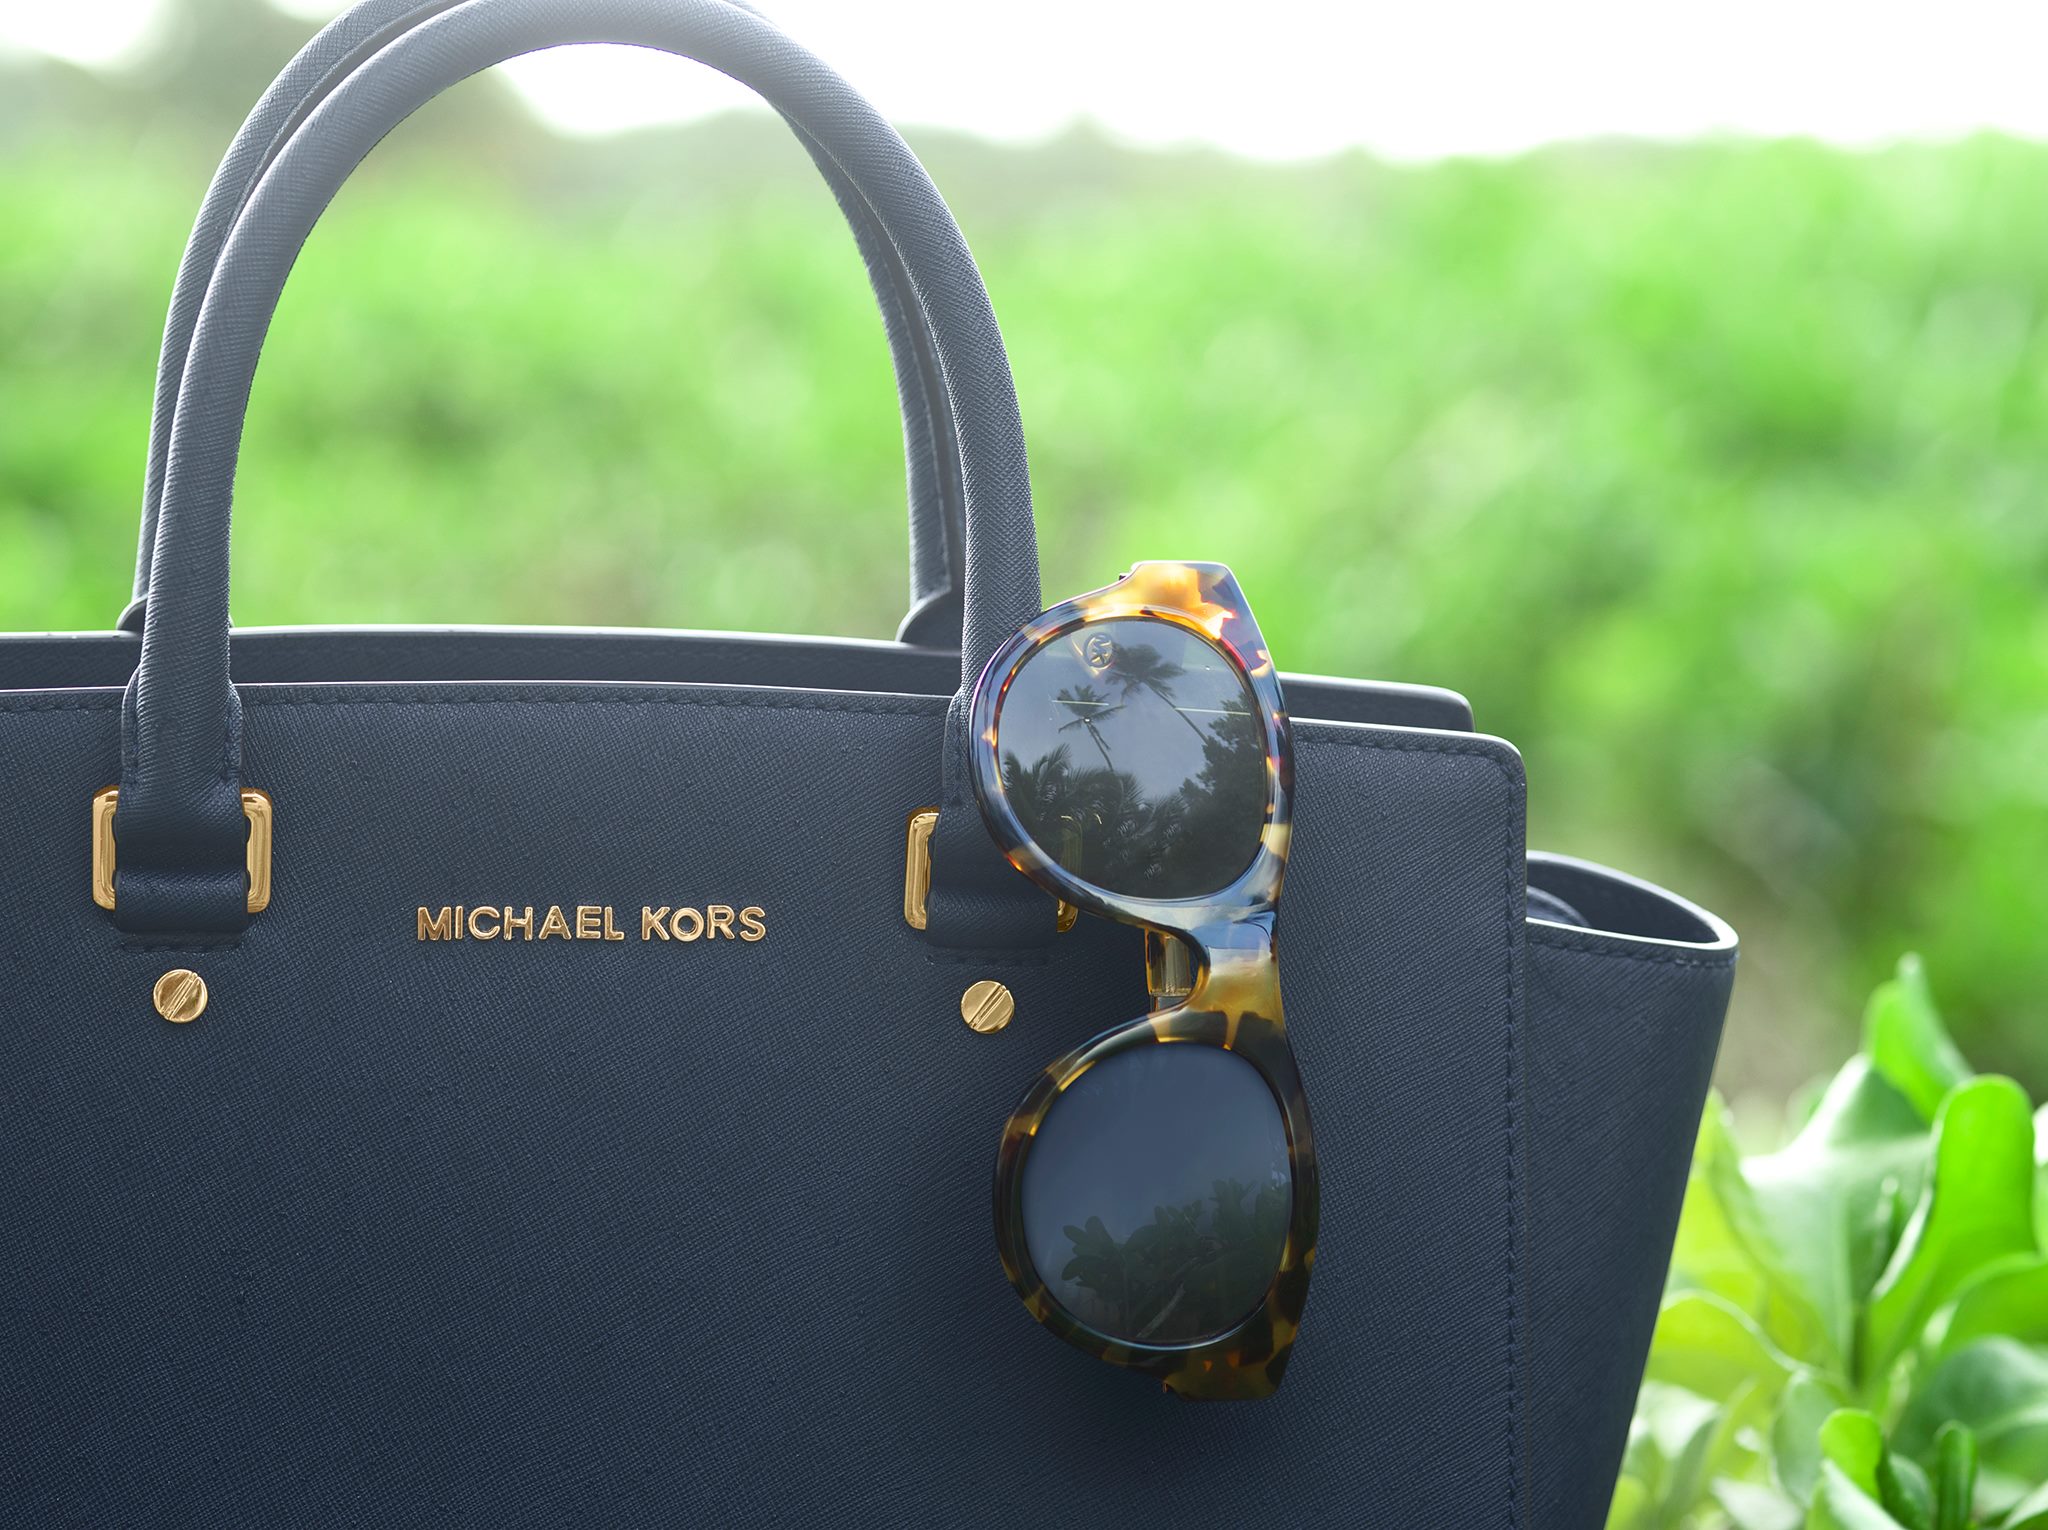 michael kors bags and accessories 